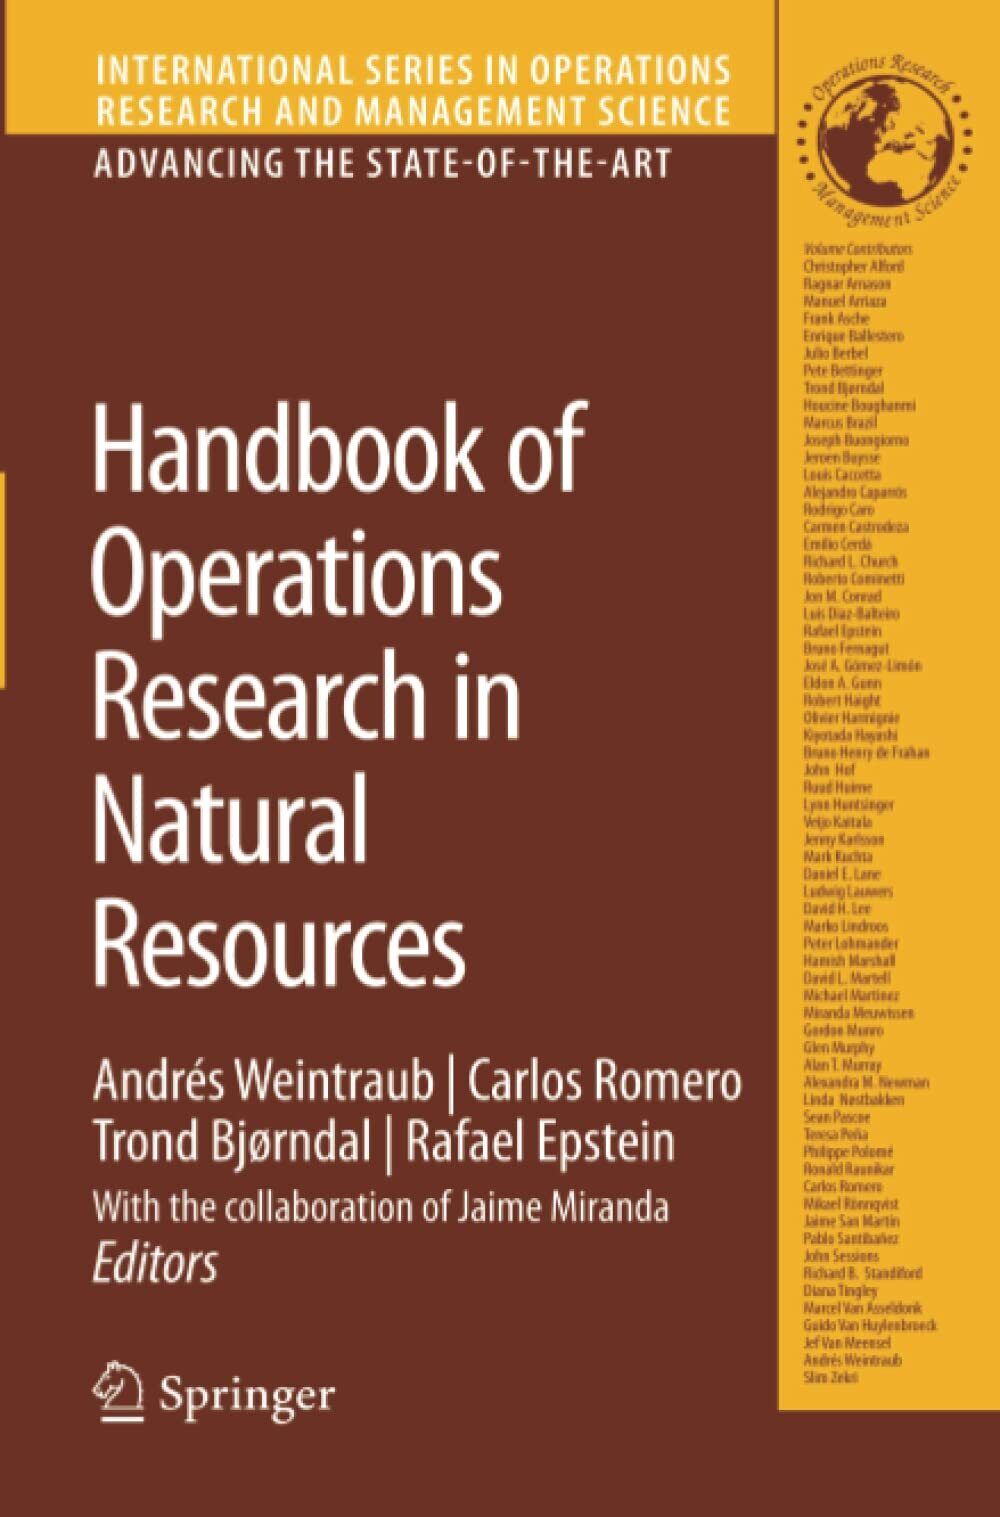 Handbook of Operations Research in Natural Resources - Andres Weintraub - 2010